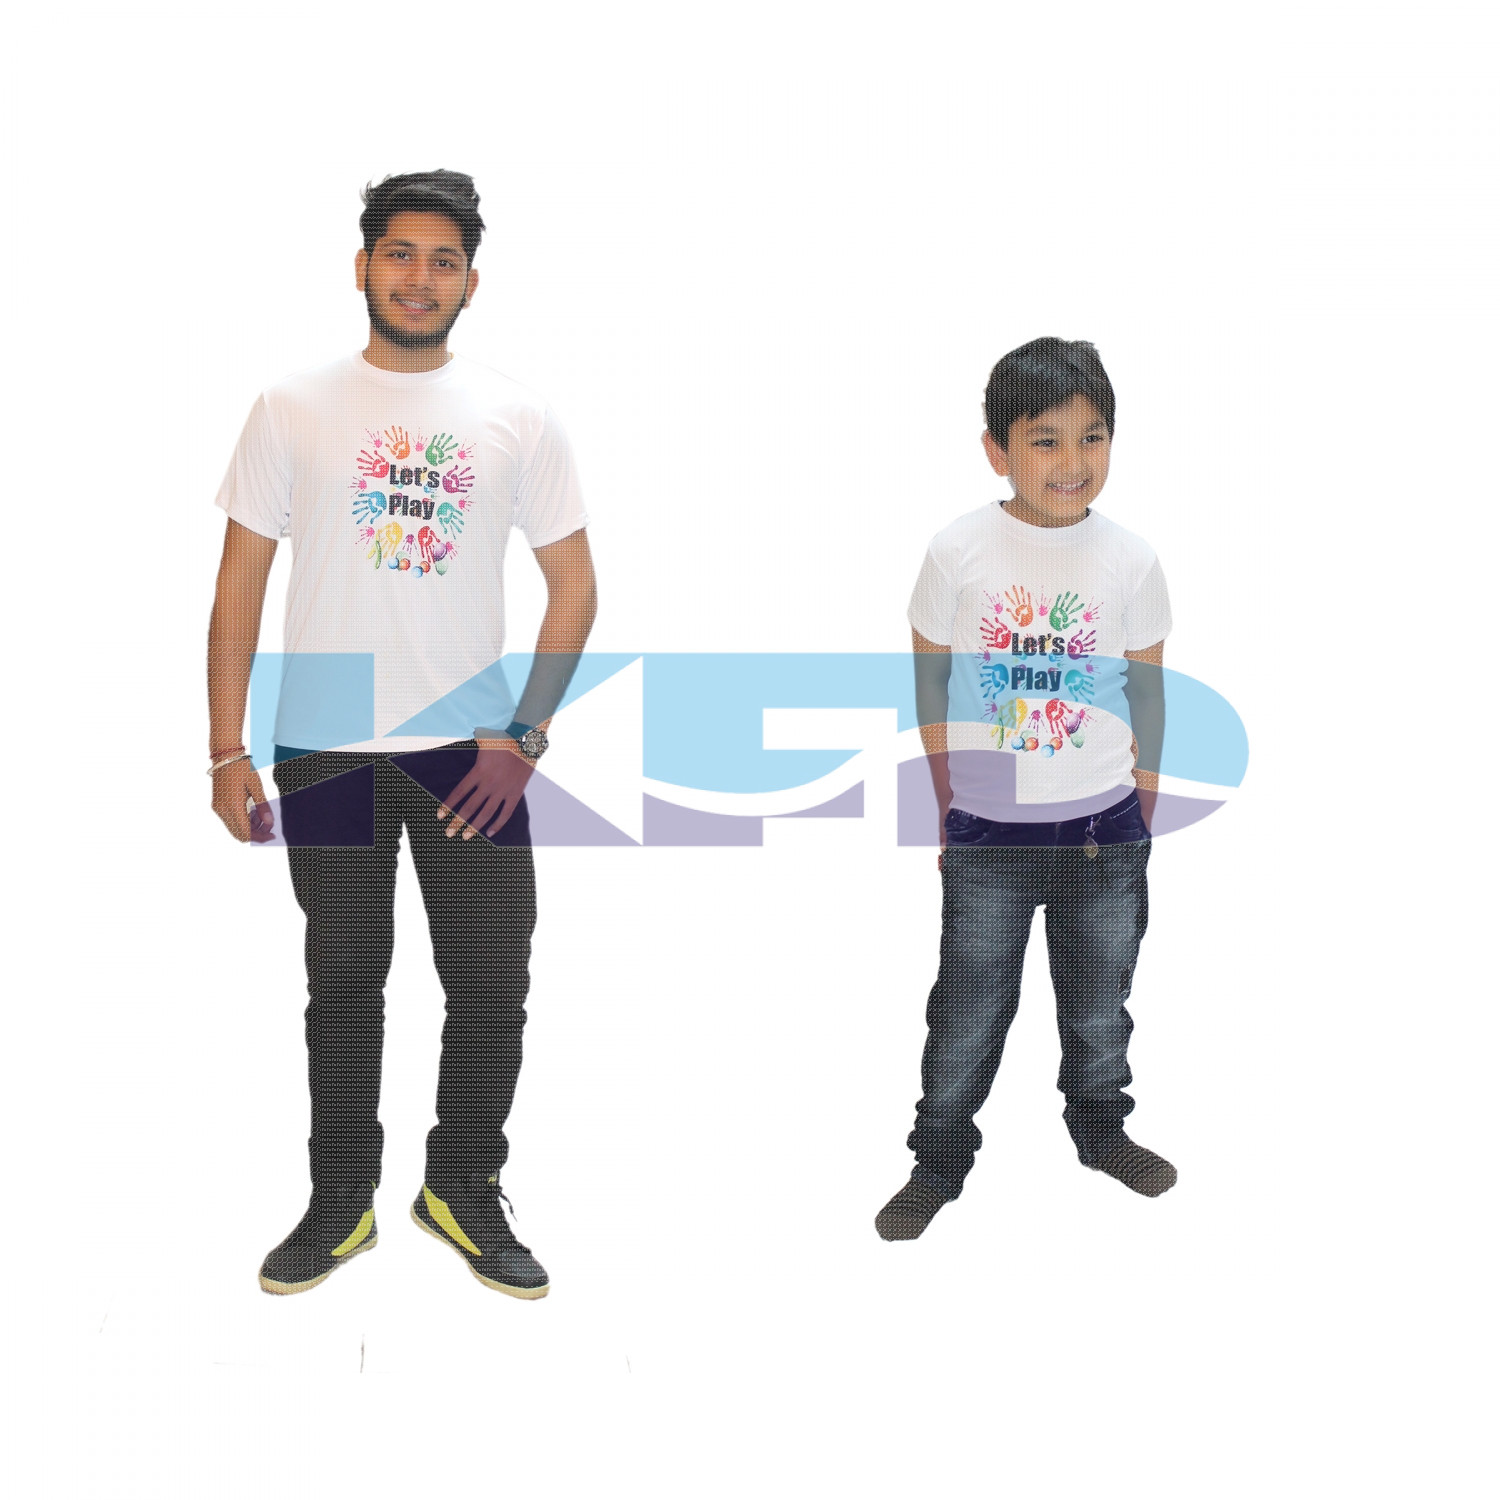 Play T-shirt Costume For Kids/Holi day/School Annual function/Theme Party/Competition/Stage Shows/Birthday Party Dress